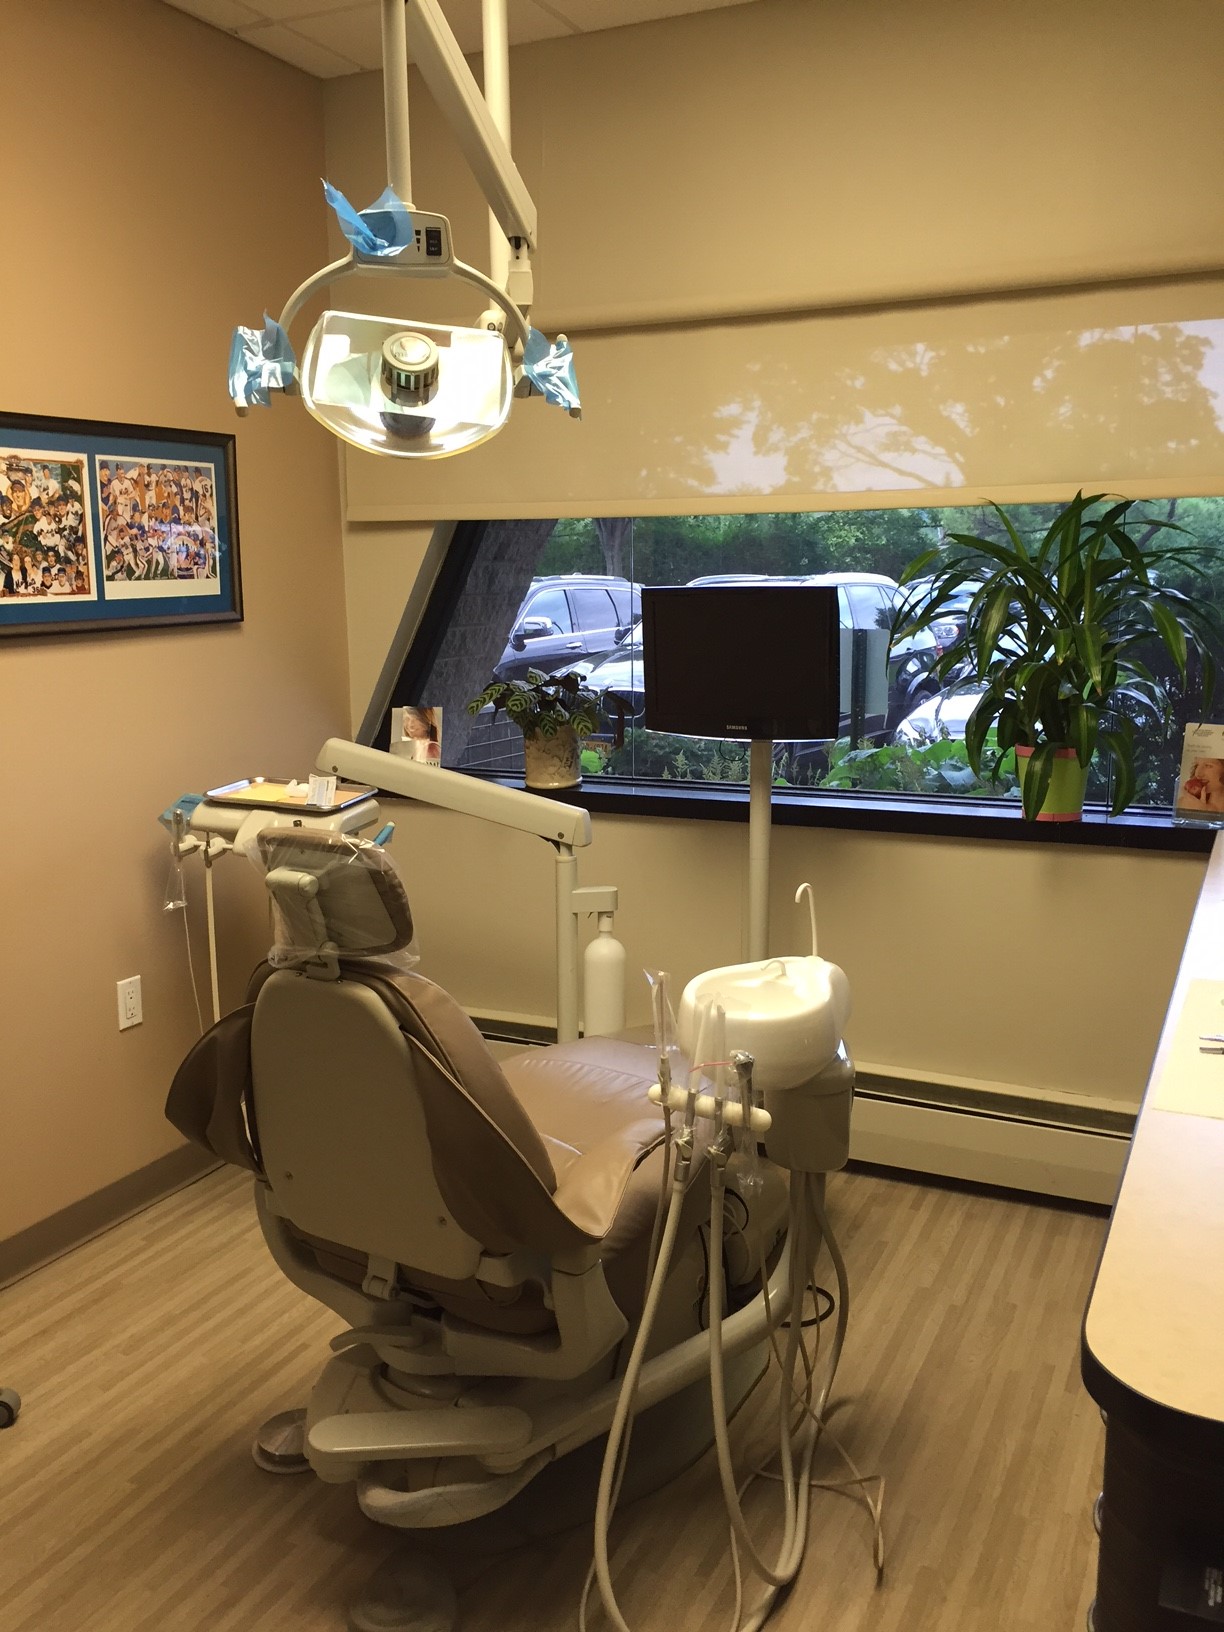 Amy L. Zuker, DMD | Pediatric Dentistry, Dental Fillings and Root Canals